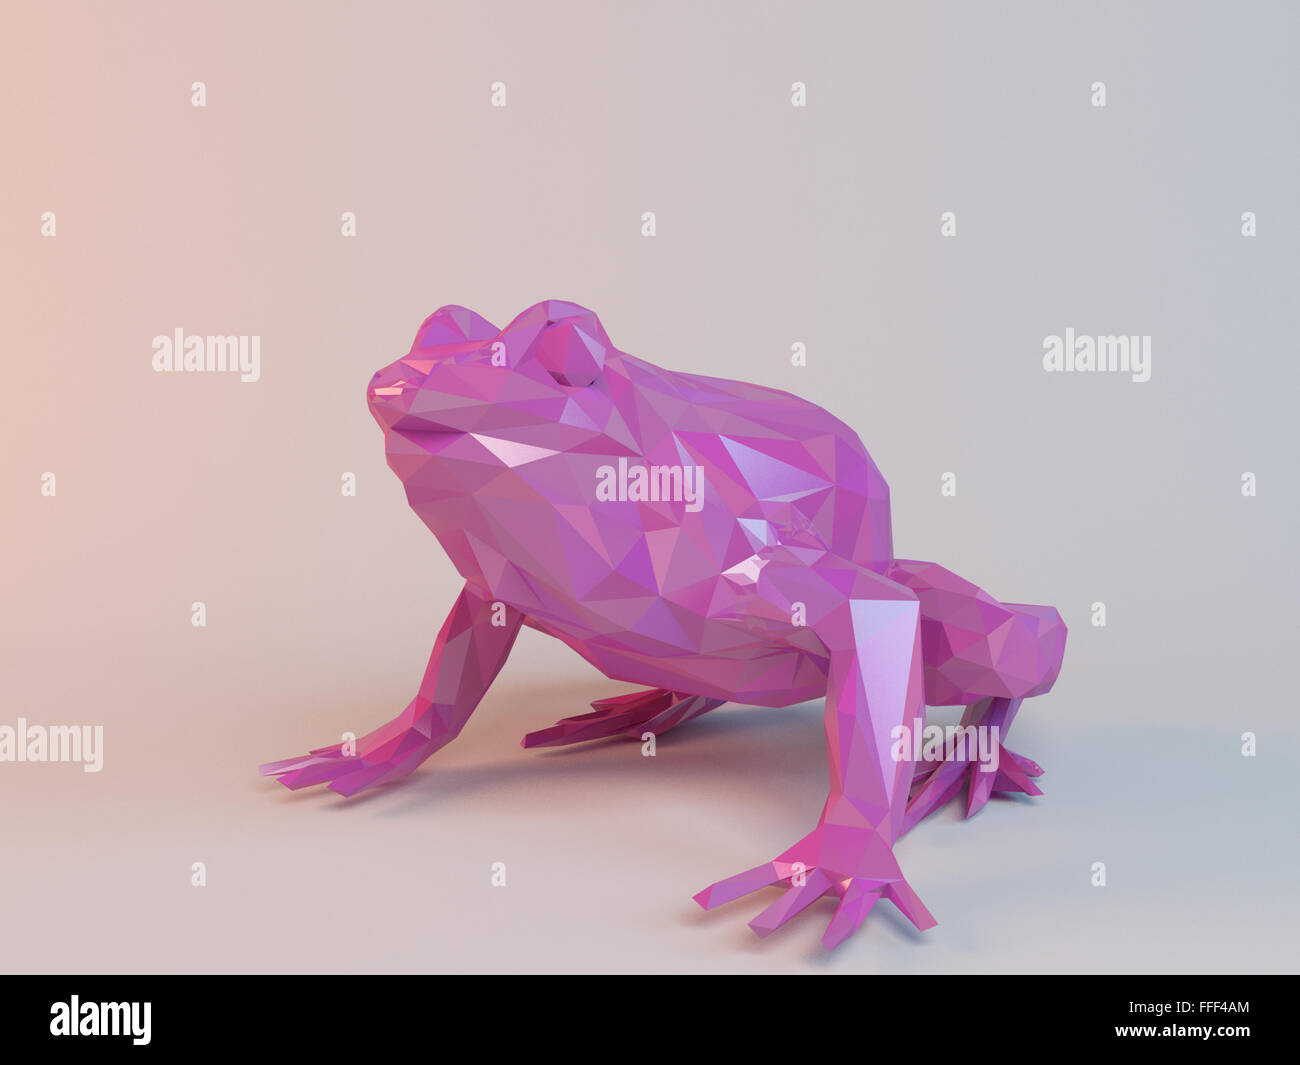 3D pink low poly animal inside a white stage with high render quality to be used as a logo, medal, symbol, shape, emblem Stock Photo